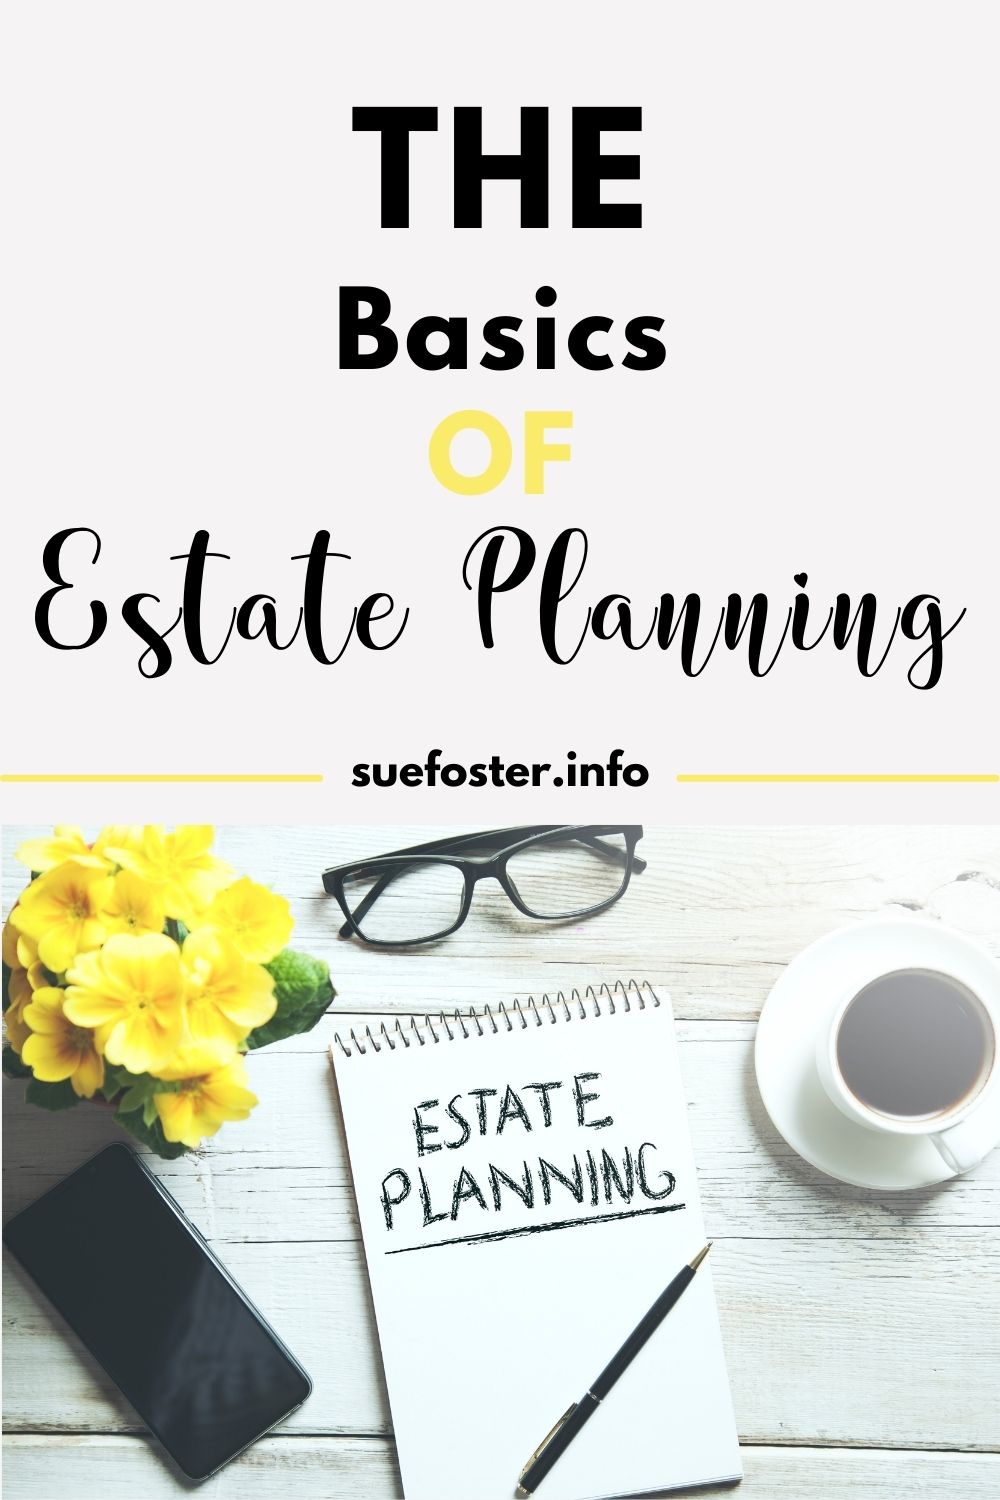 With the correct information, making sure your family will be taken care of after you’re gone becomes less daunting. Here are things to know about estate planning that will make the process more approachable.